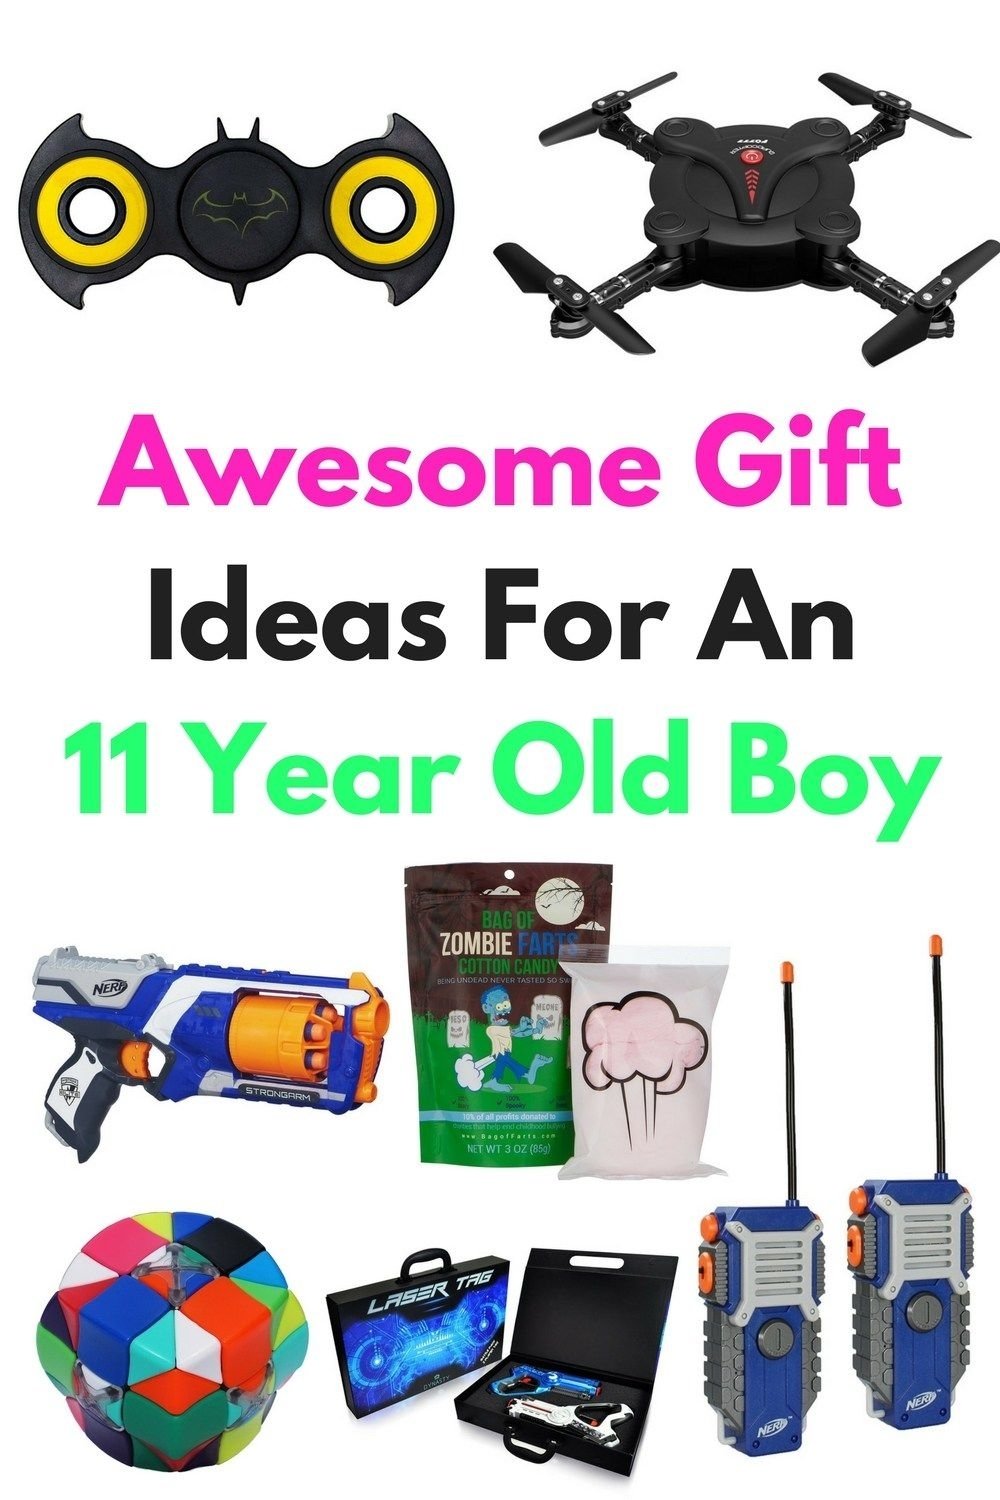 10 Most Popular 11 Year Old Boy Christmas Gift Ideas awesome gift ideas for an 11 year old boy awesome gifts easter 5 2022